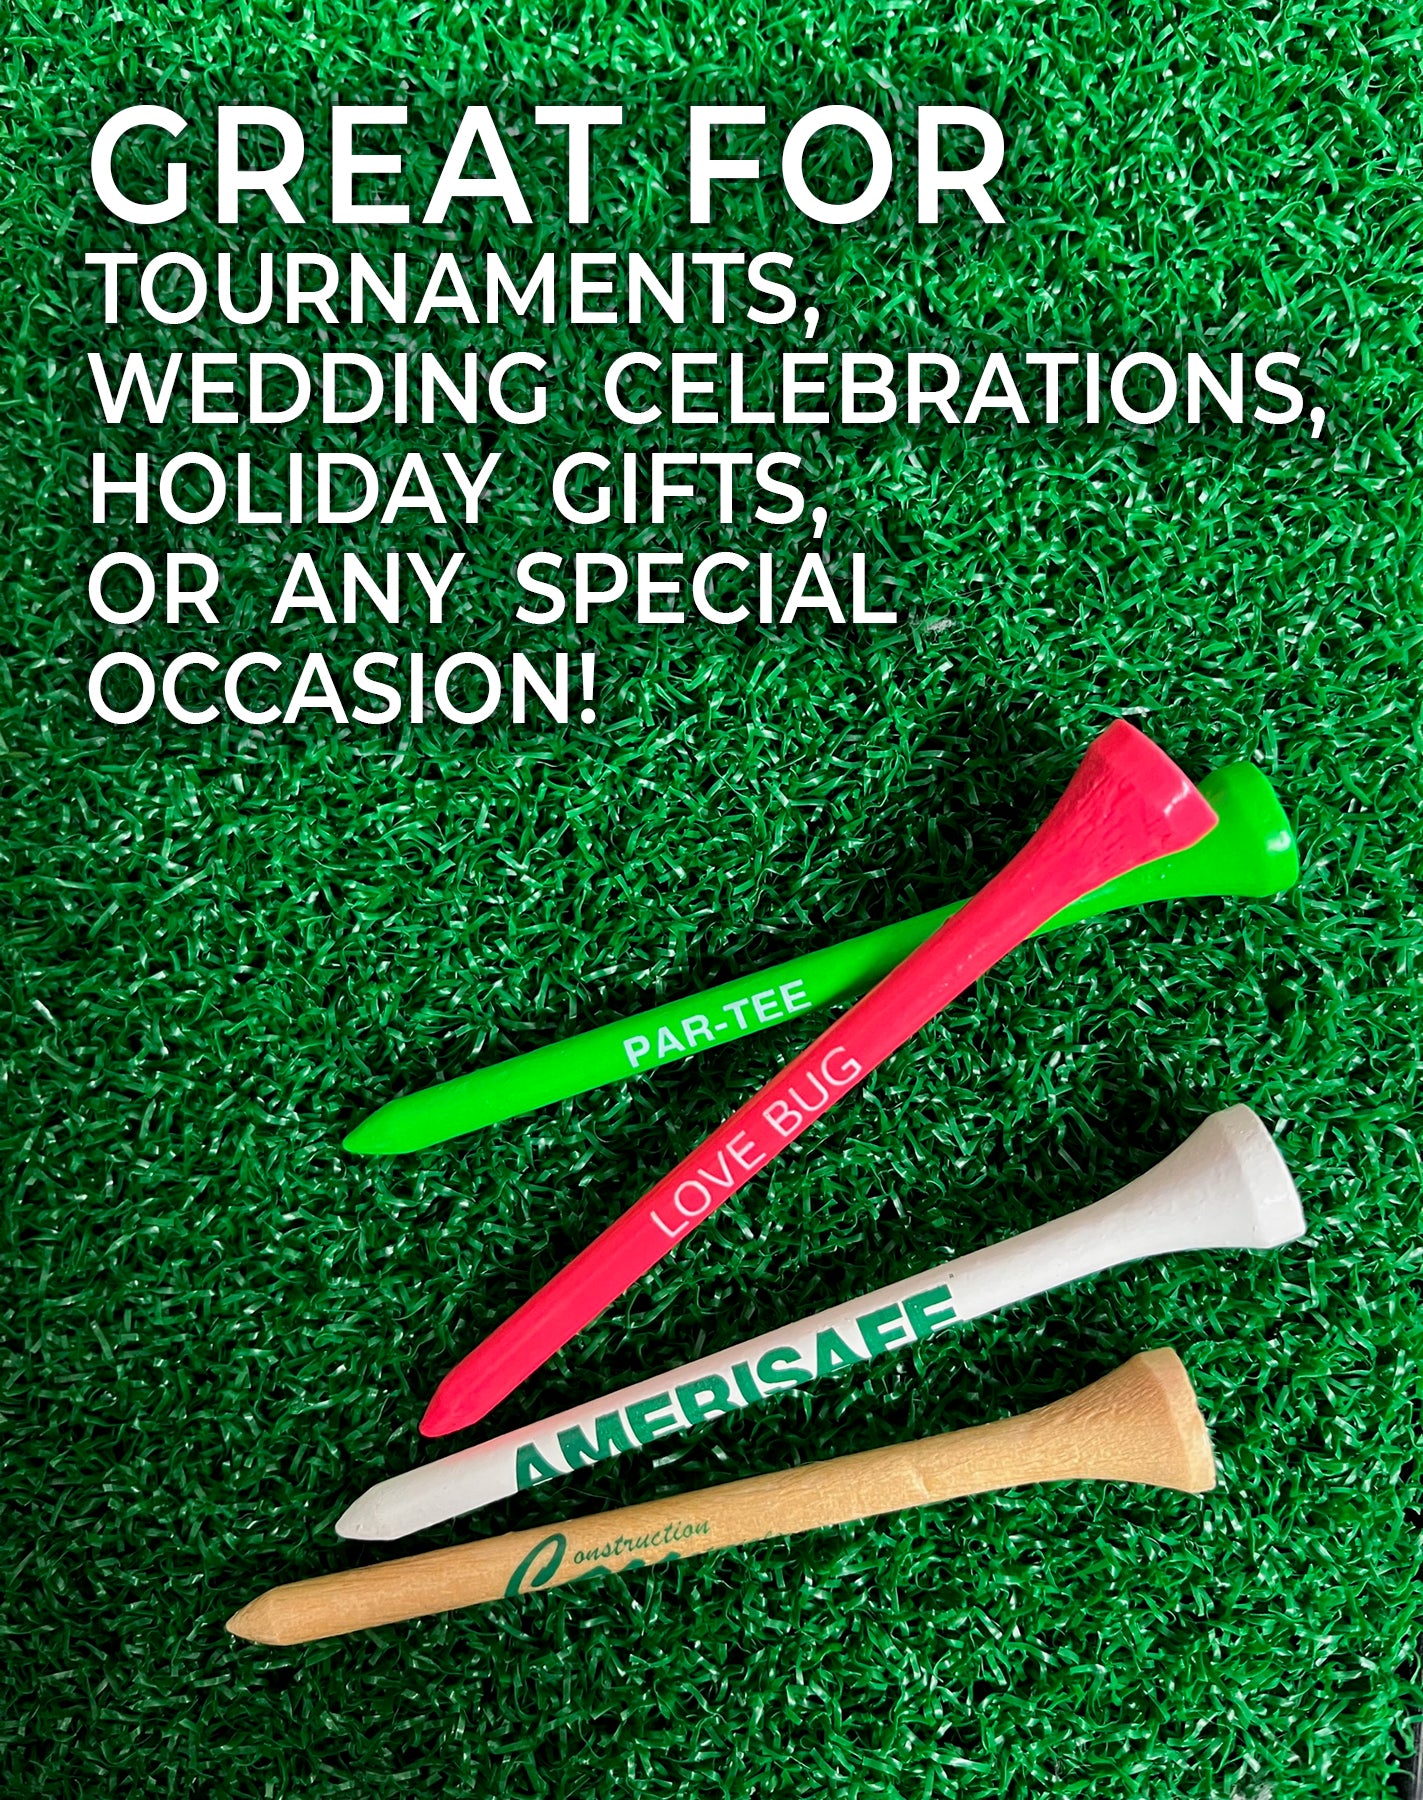 Personalized Combo Packs - 10 Tees, 2 Ball Markers, and 1 Divot Repair Tool